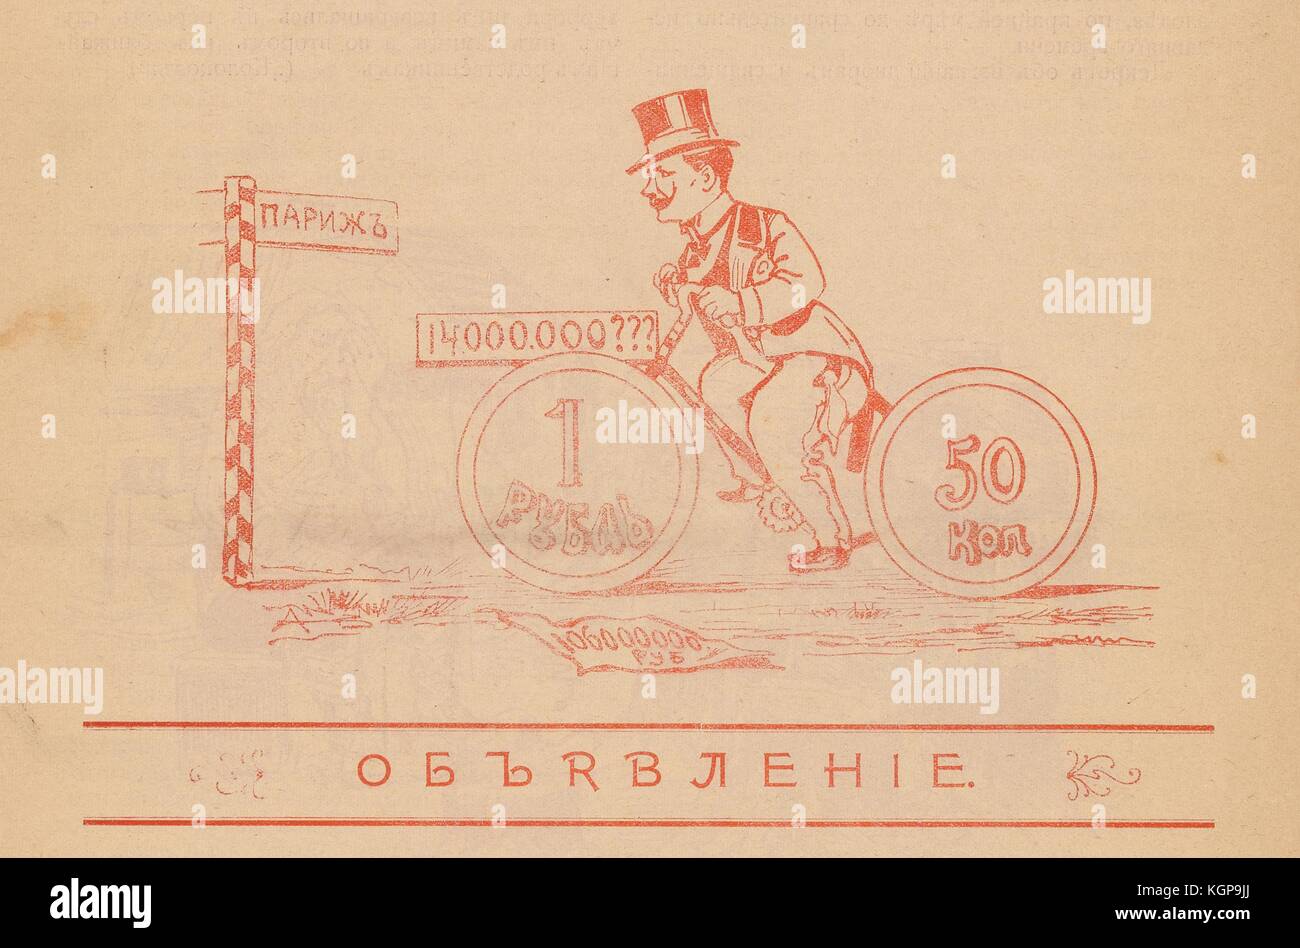 Cartoon from the Russian satirical journal Miting (Rally) depicting a man in a top hat riding a bicycle that says '1 ruble' on one wheel and '50 kopeks' on the other; There is also a paper on the ground that says '106, 000, 000 rubles' and a signpost that says 'Paris', 1906. () Stock Photo